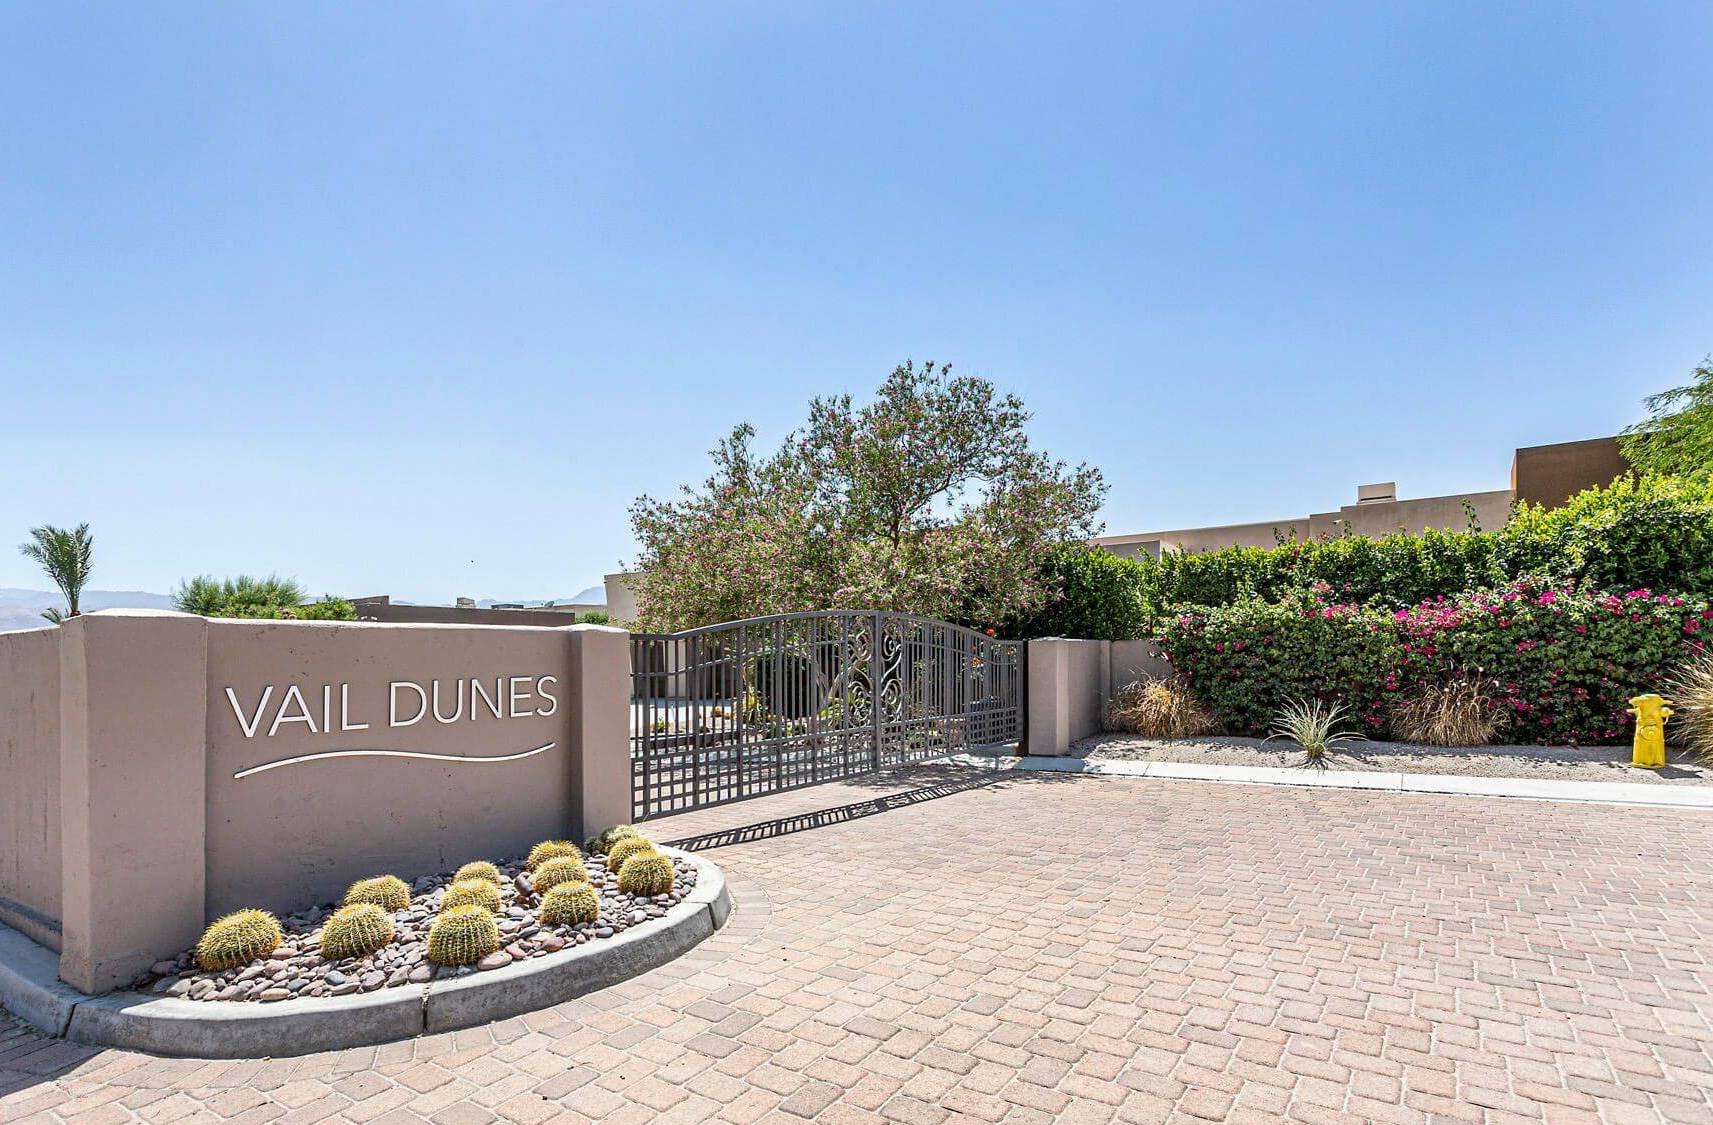 Vail Dunes Real Estate